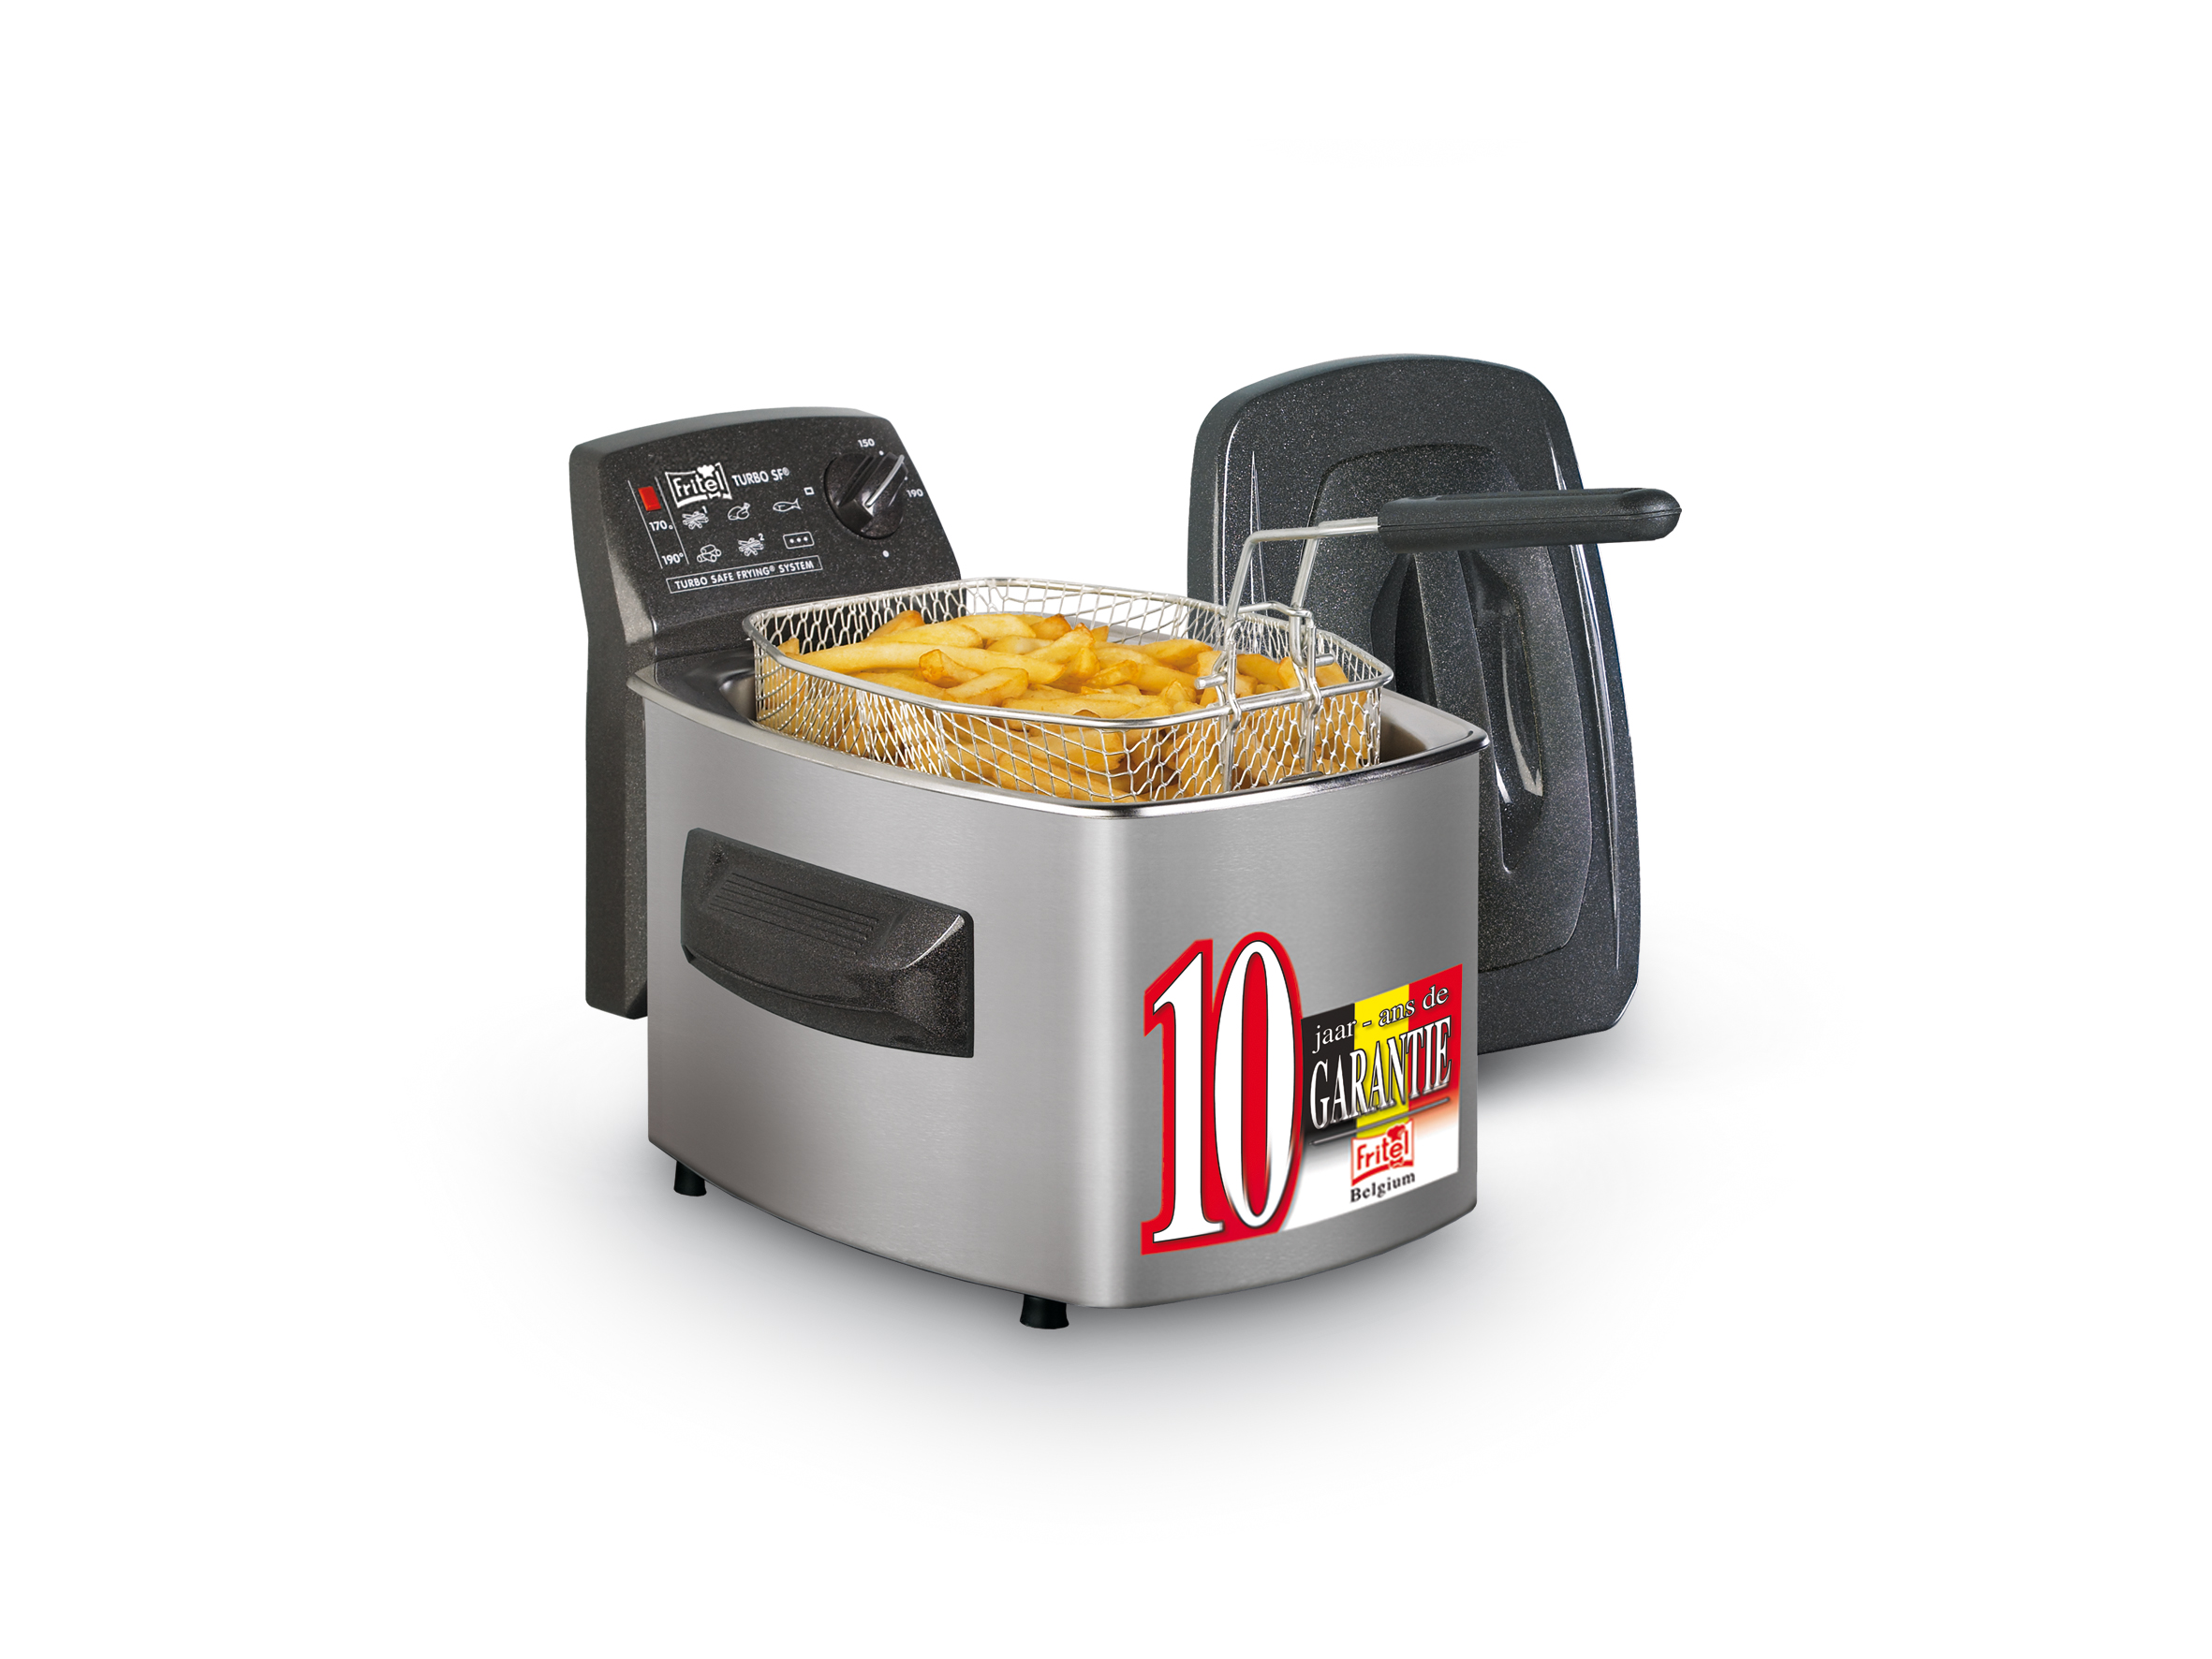 Image of Fritel Friteuse SF4240 3.0L, 2300W